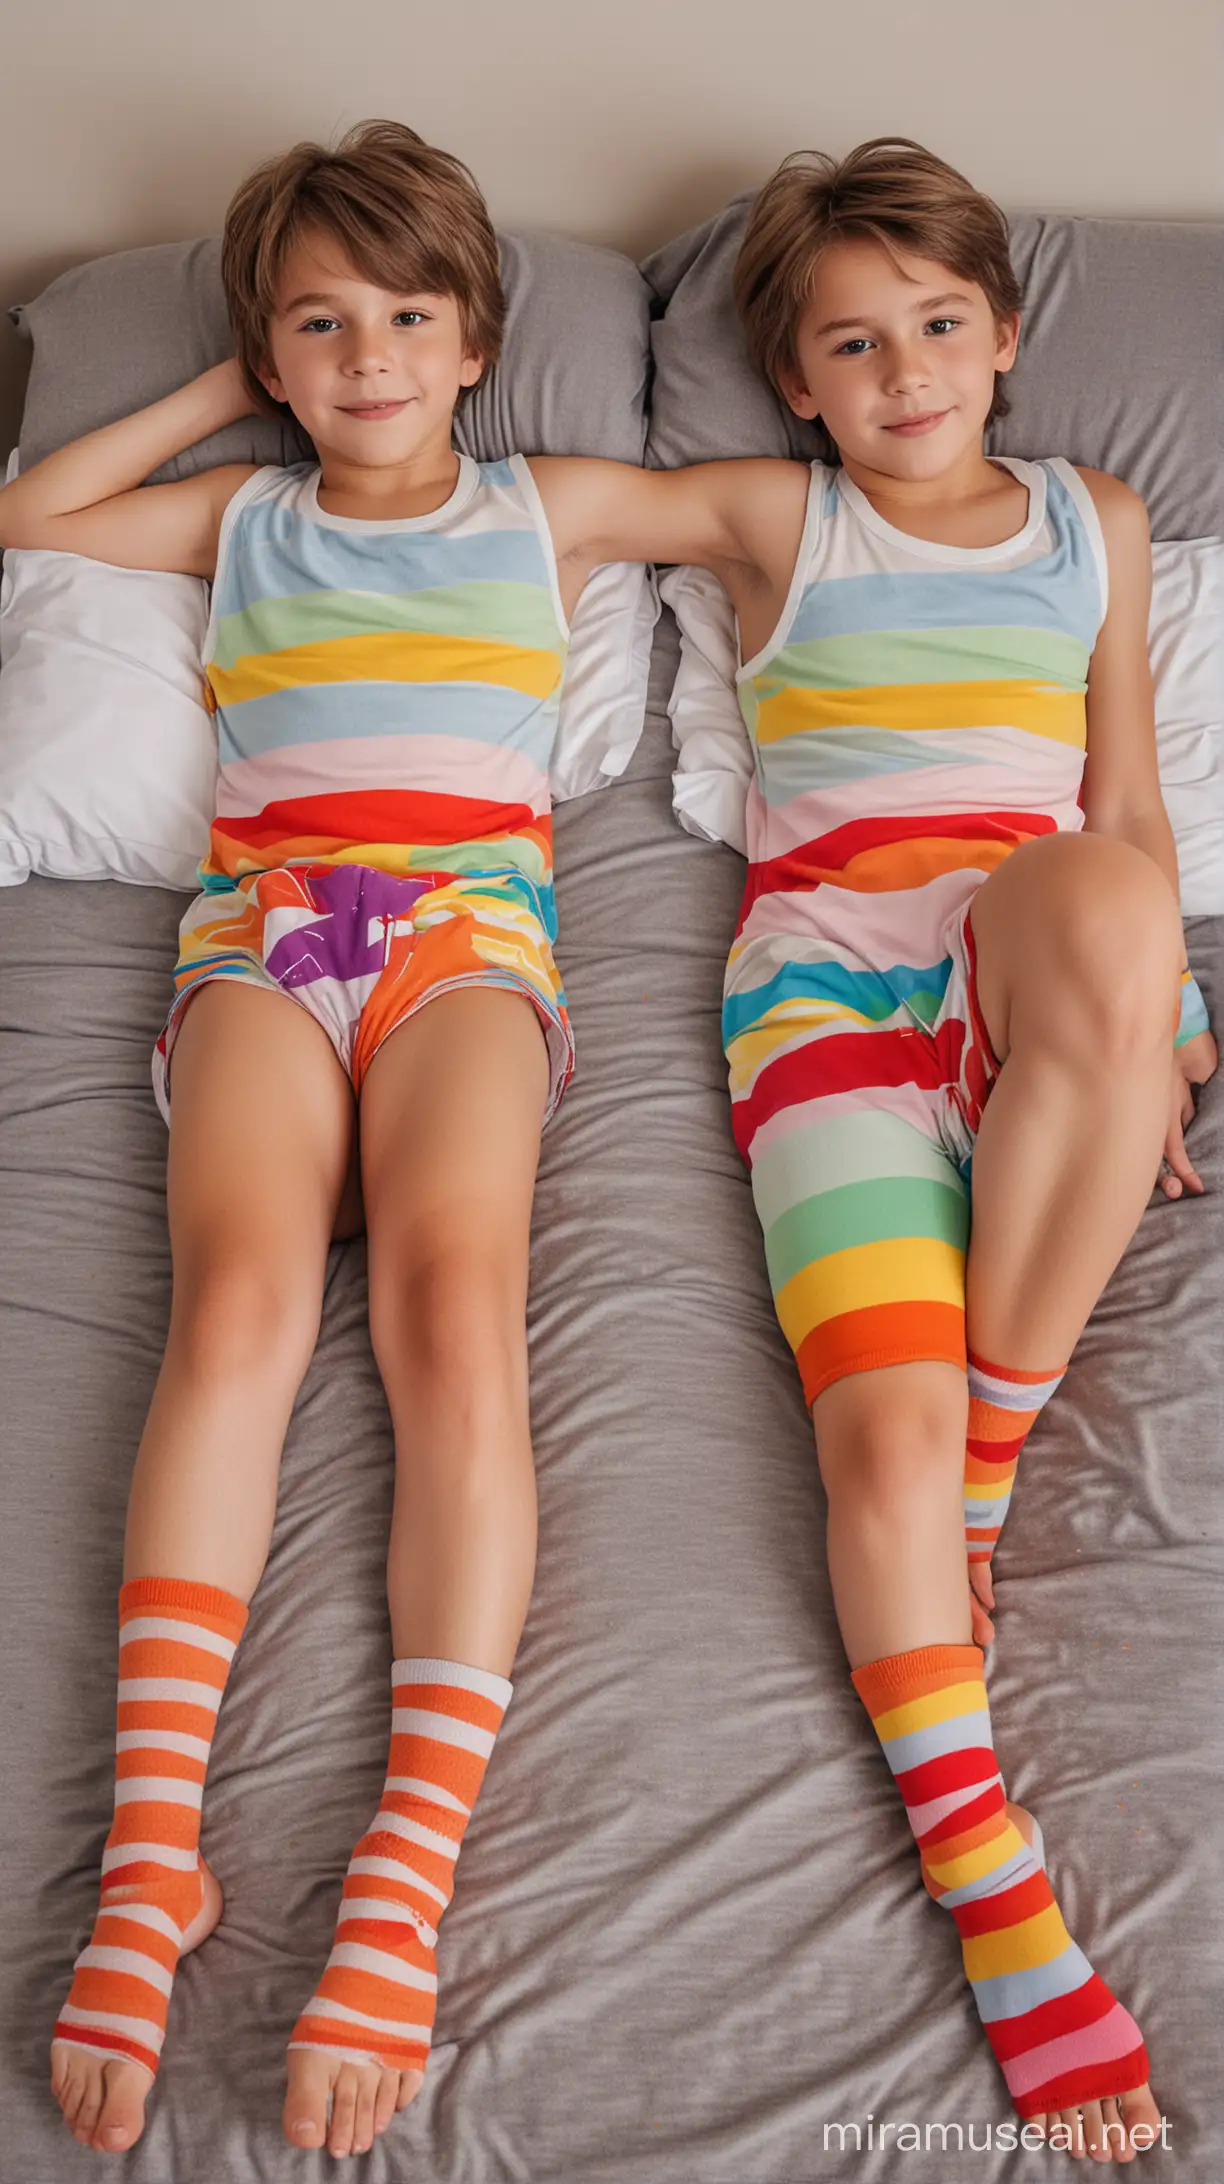 Youthful Duo in Colorful Attire Relaxing on Stylish Bed